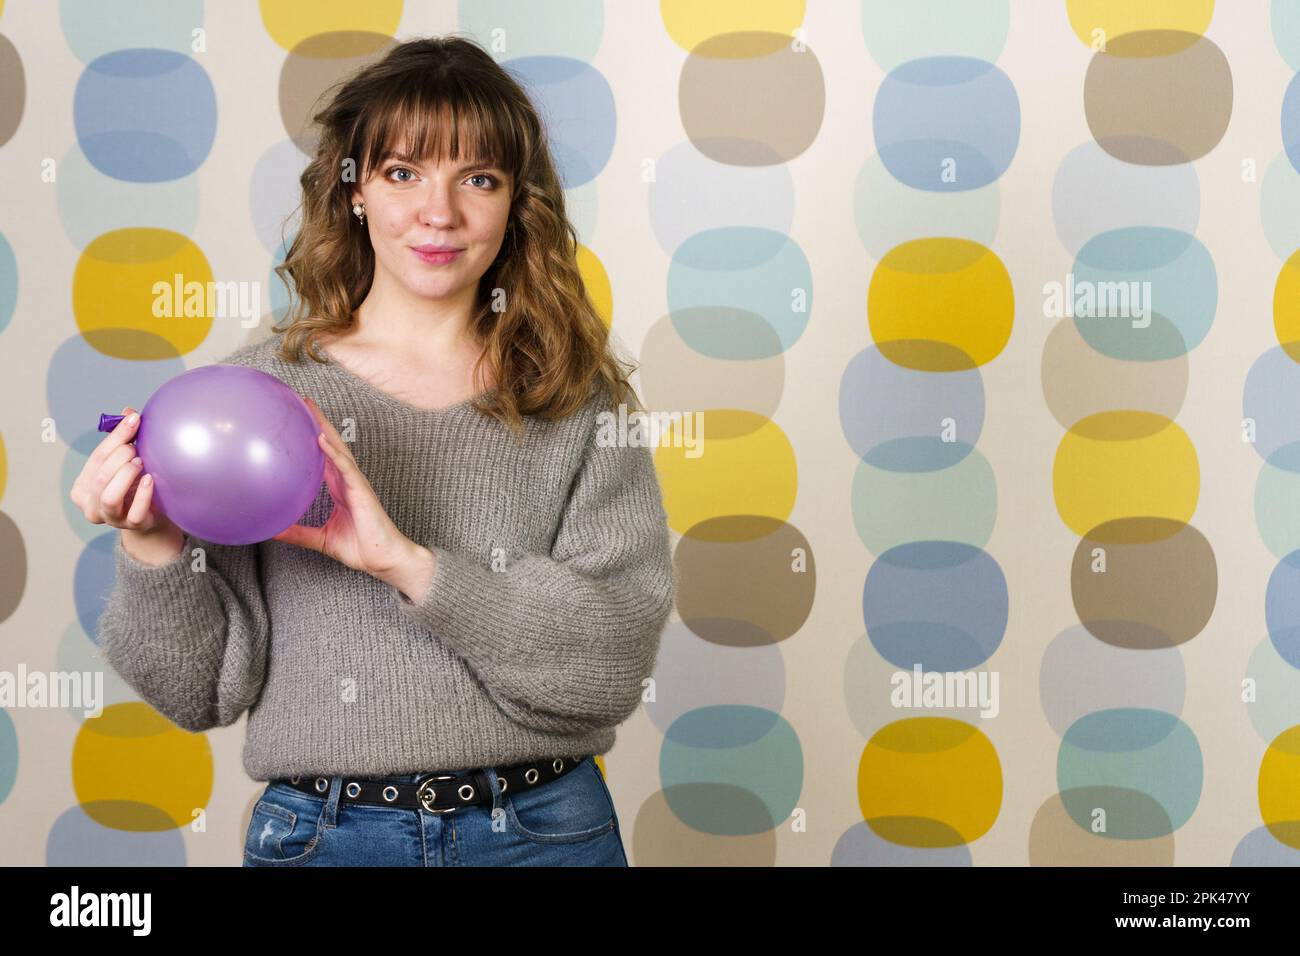 Young Woman Holding and Deflating a Purple Balloon Stock Photo